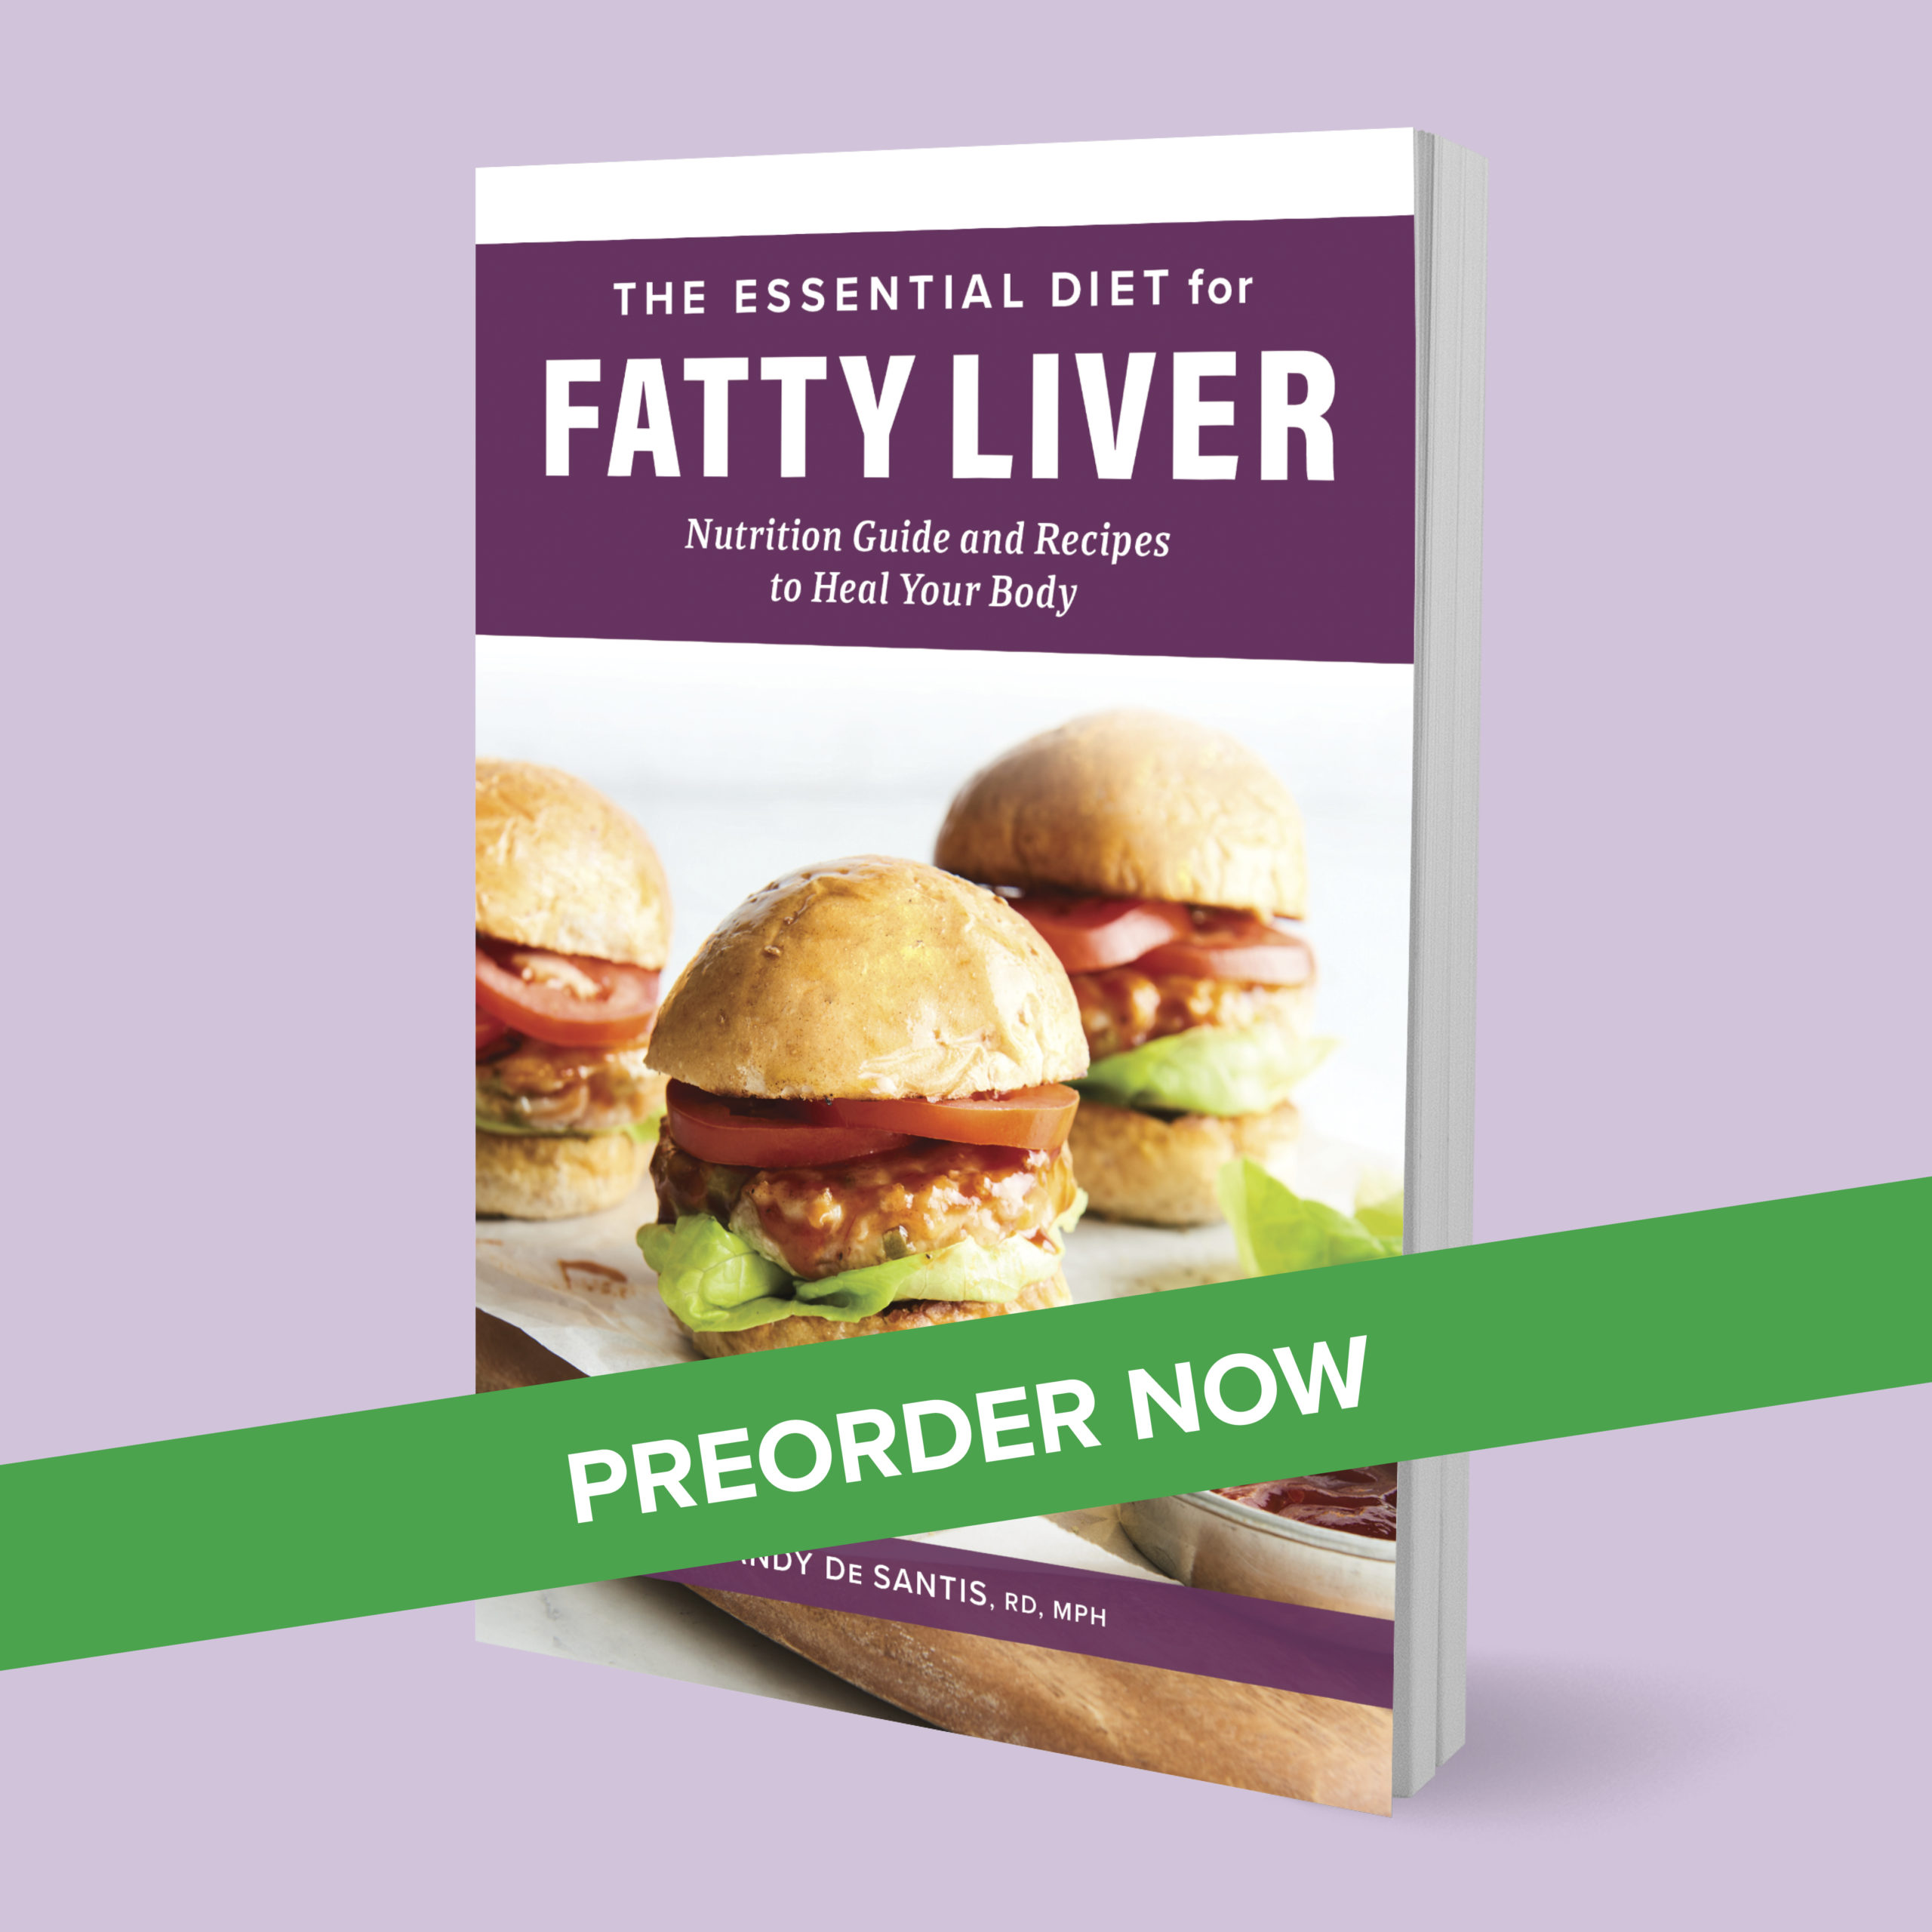 Milk Thistle For Fatty Liver – Does It Help?